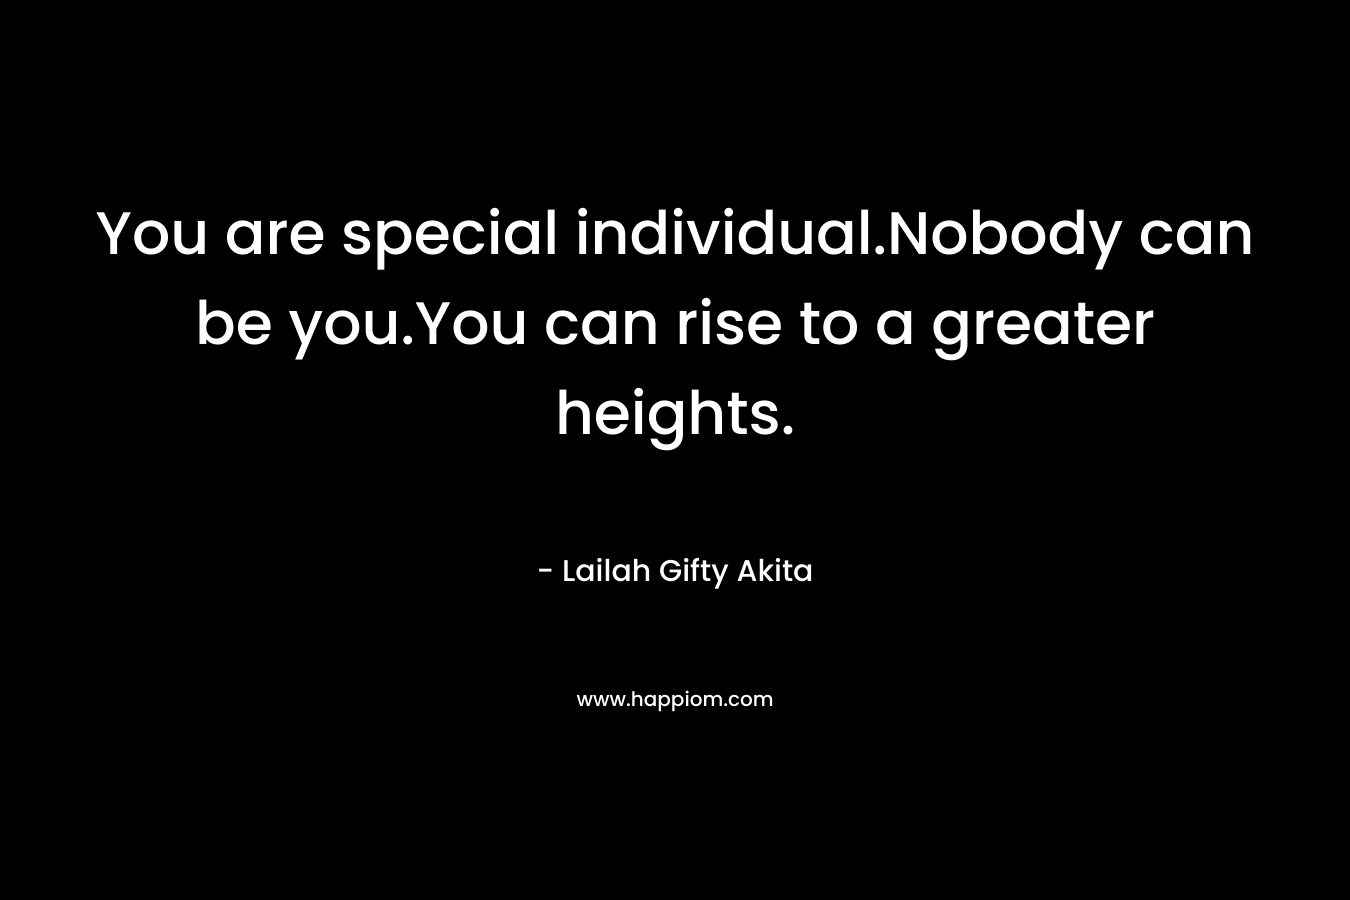 You are special individual.Nobody can be you.You can rise to a greater heights. – Lailah Gifty Akita